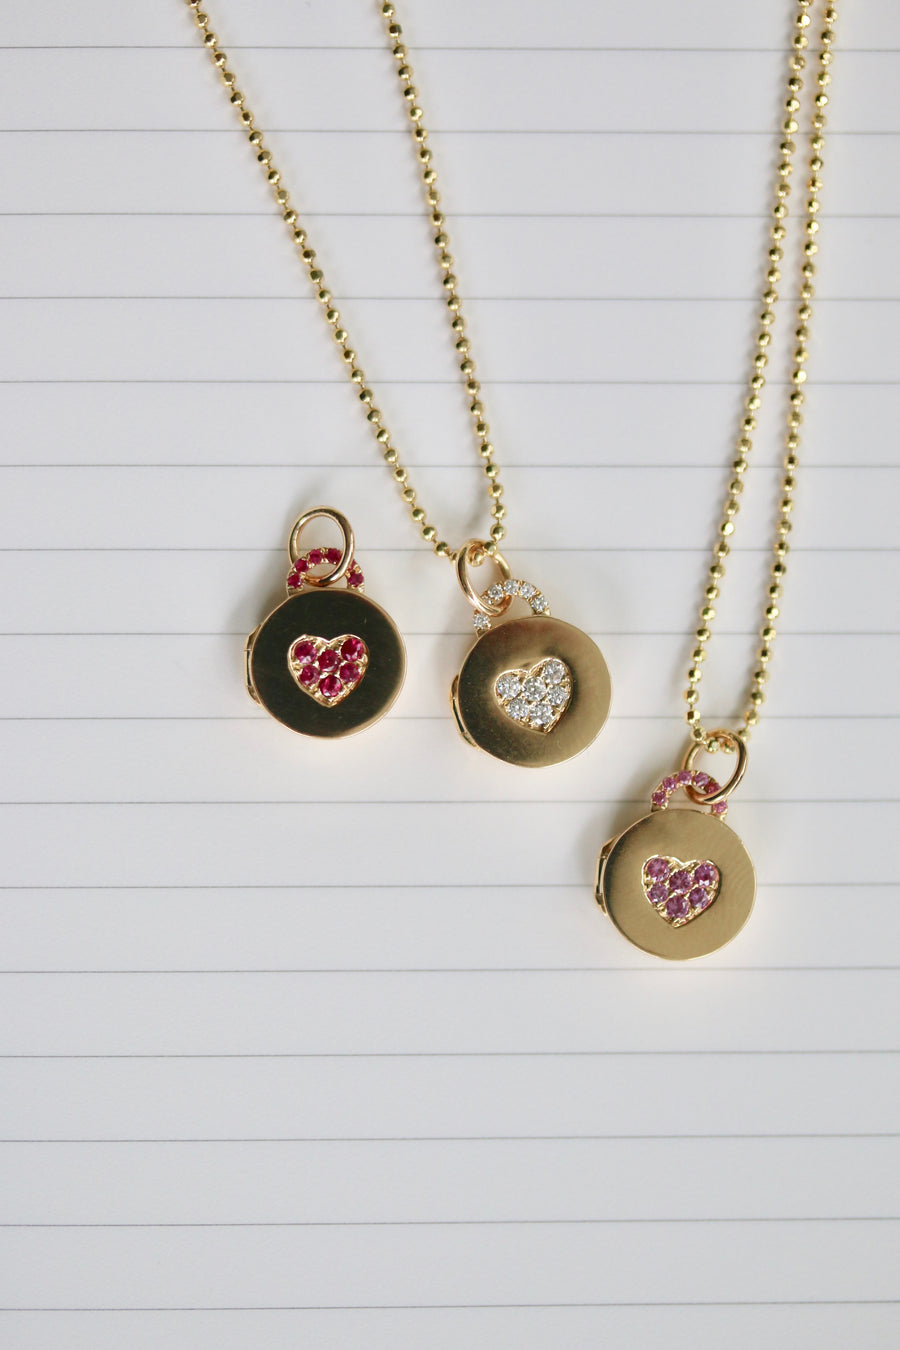 Mini heart-shaped locket pendant necklace adorned with pavé rubies, exuding elegance and charm. This dainty accessory features a delicate locket design encrusted with vibrant pavé rubies, adding a touch of glamour to any ensemble. The rich red hues of the rubies create a captivating contrast against the lustrous metal, making this necklace a statement of timeless beauty and sophistication.